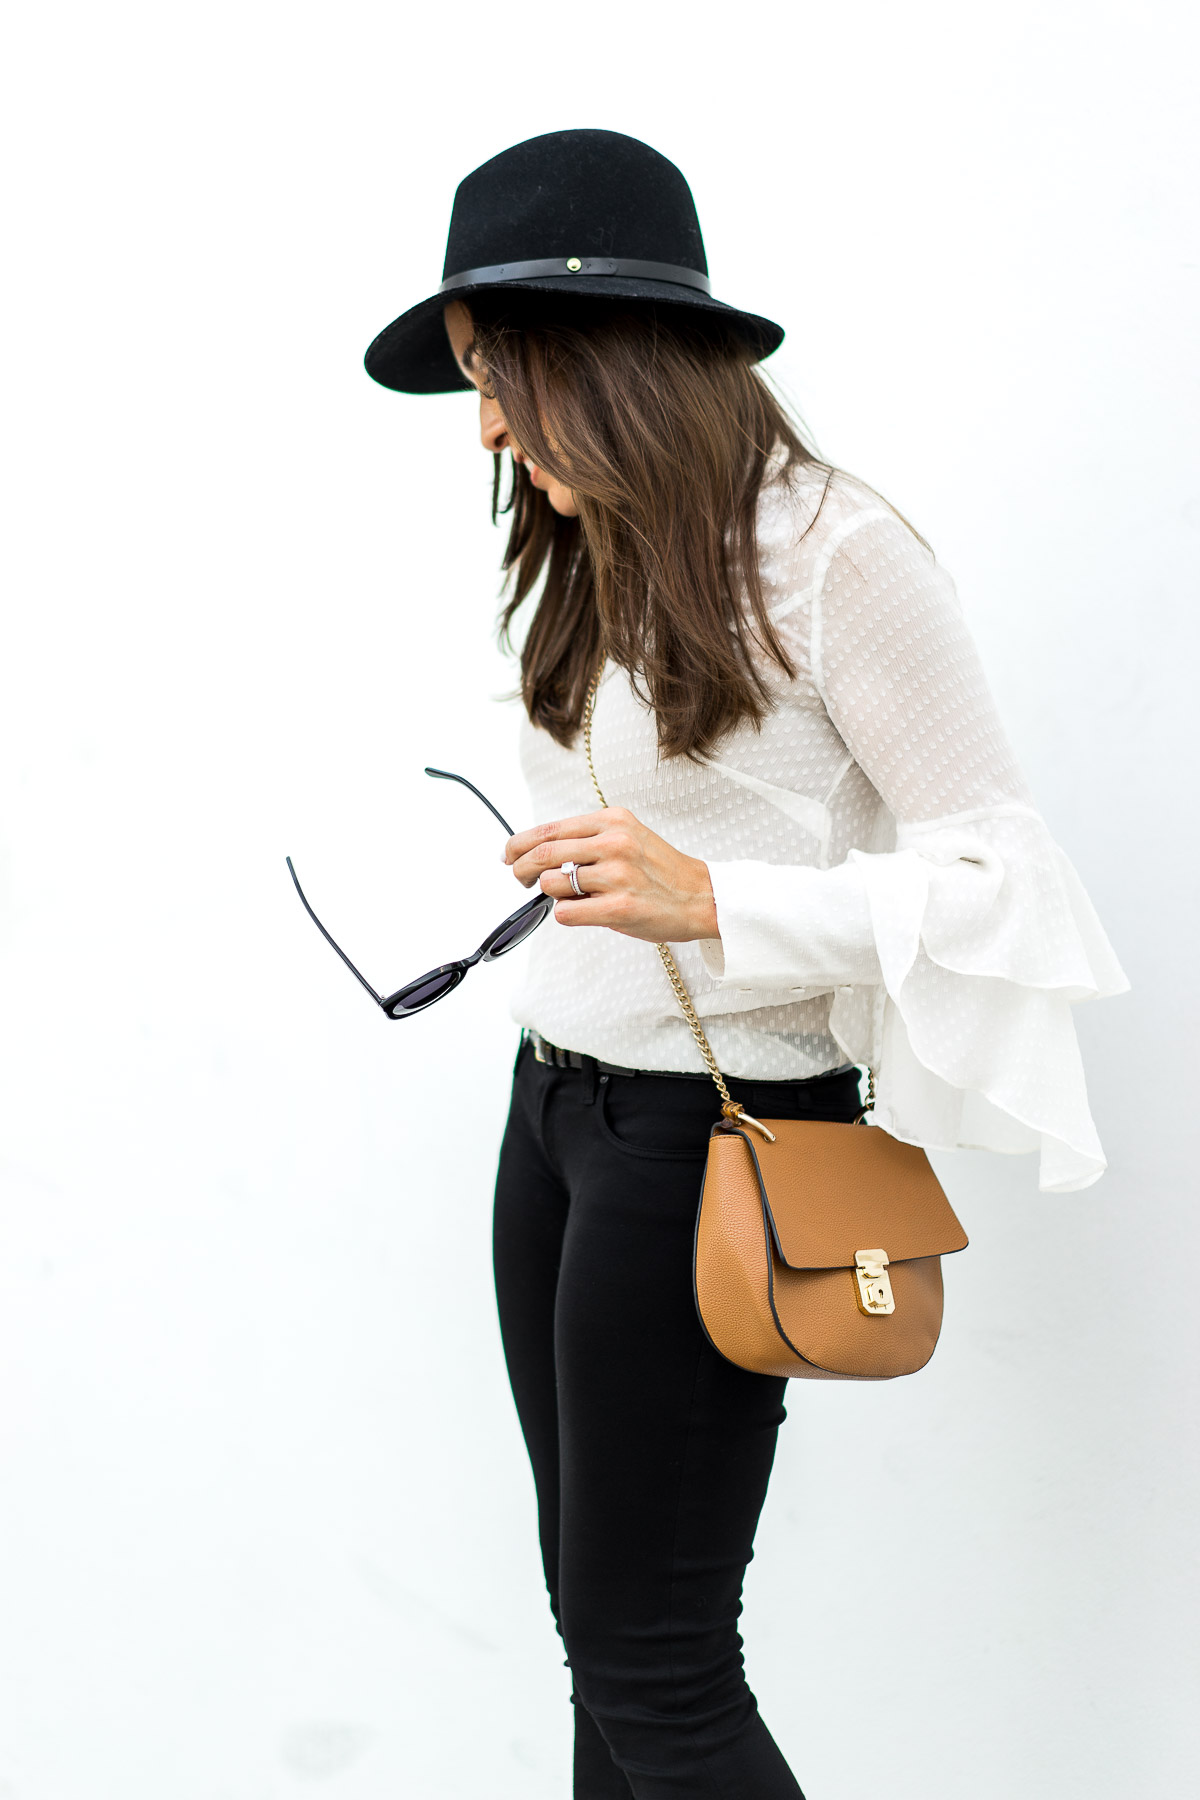 Fashion blogger Amanda who writes A Glam Lifestyle wears Olivia Palermo x Chelsea28 sheer white blouse with Chloe Drew bag dupe and black AG Jeans leggings